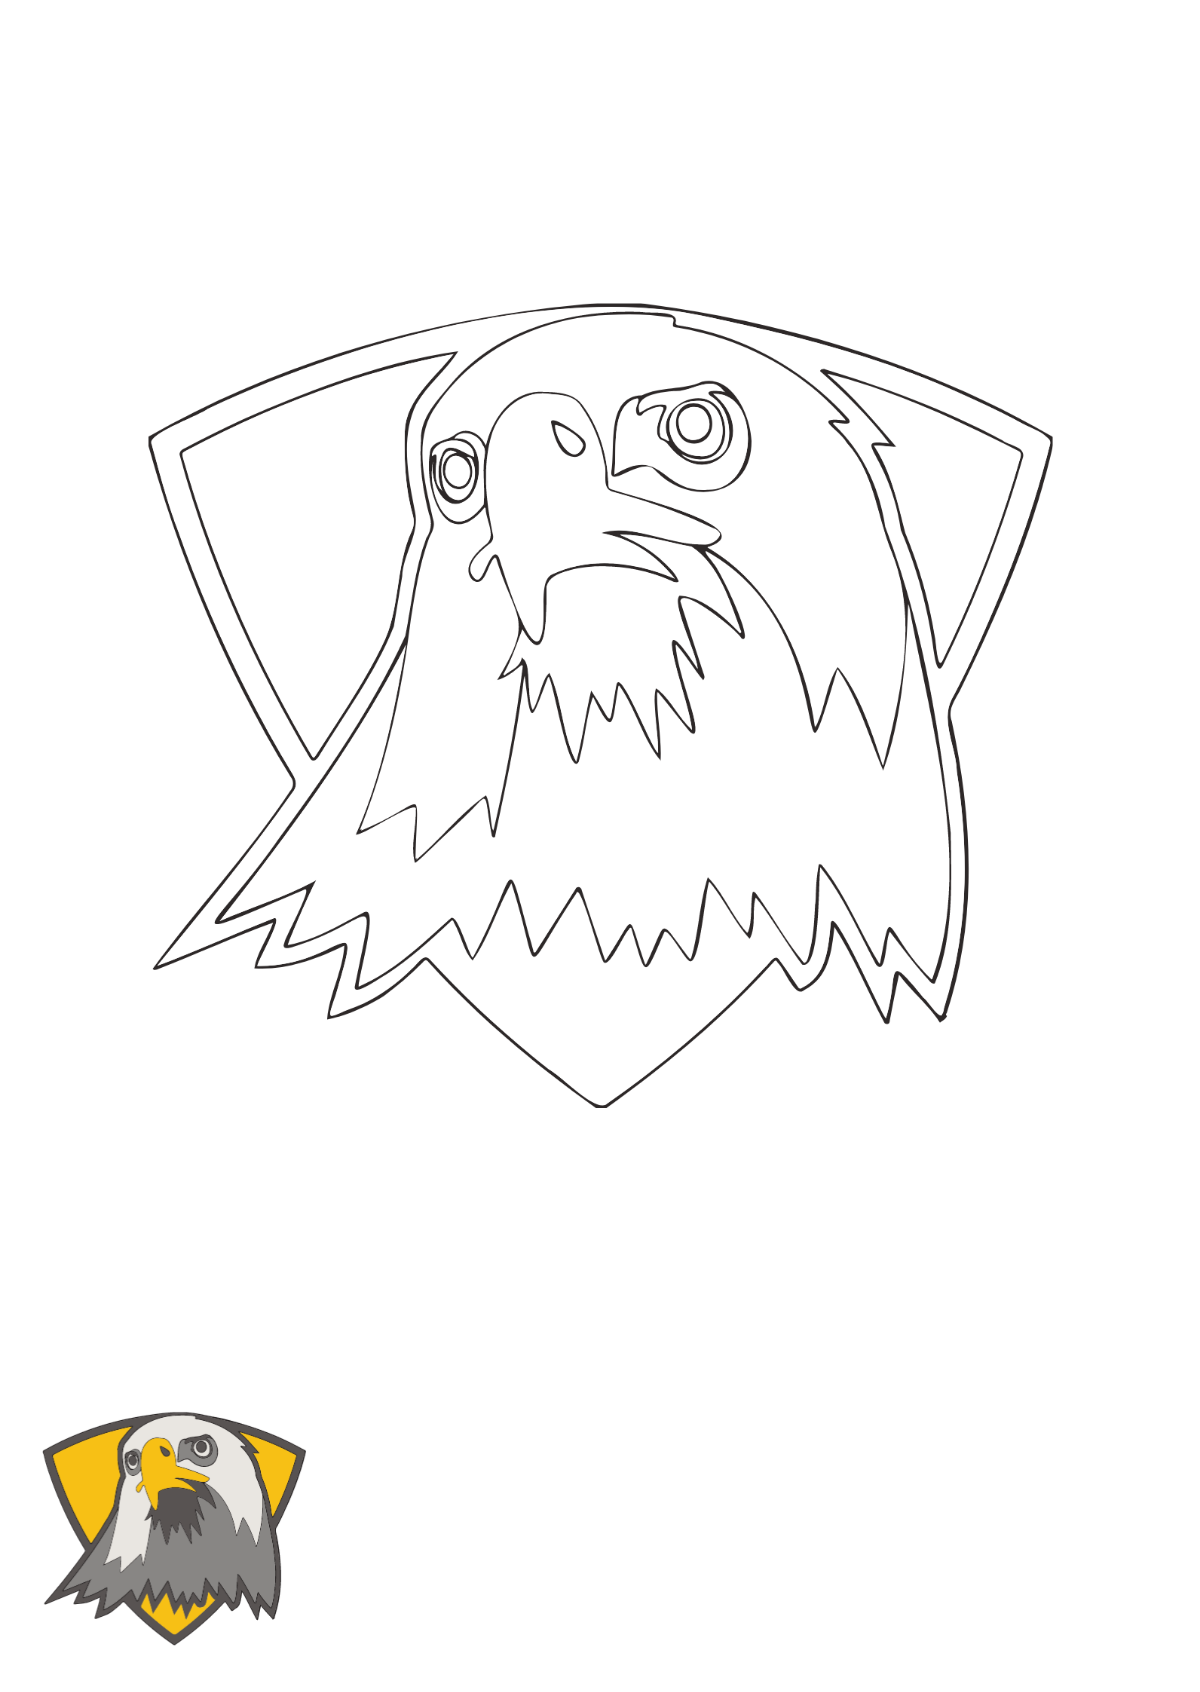 Eagle Mascot coloring page Template